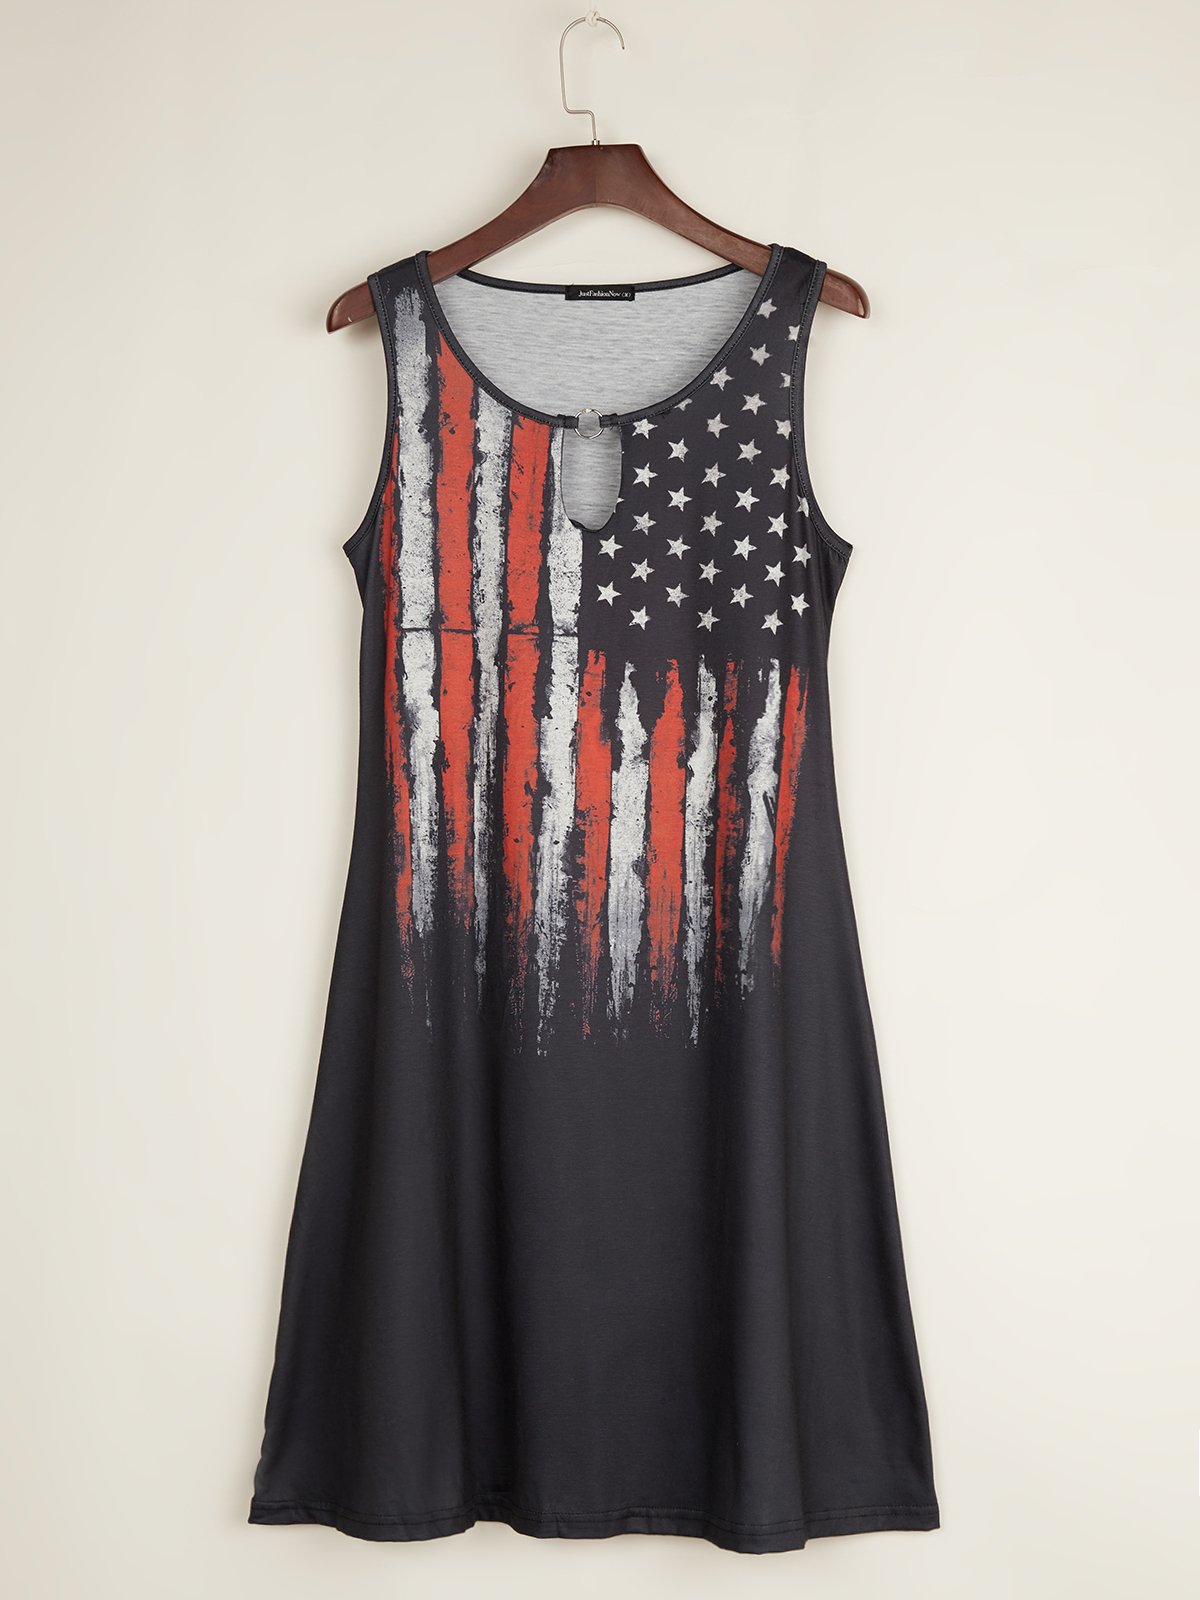 Flag Printed Scoop Neckline Casual Cotton-Blend Casual Holiday Knitting Dress